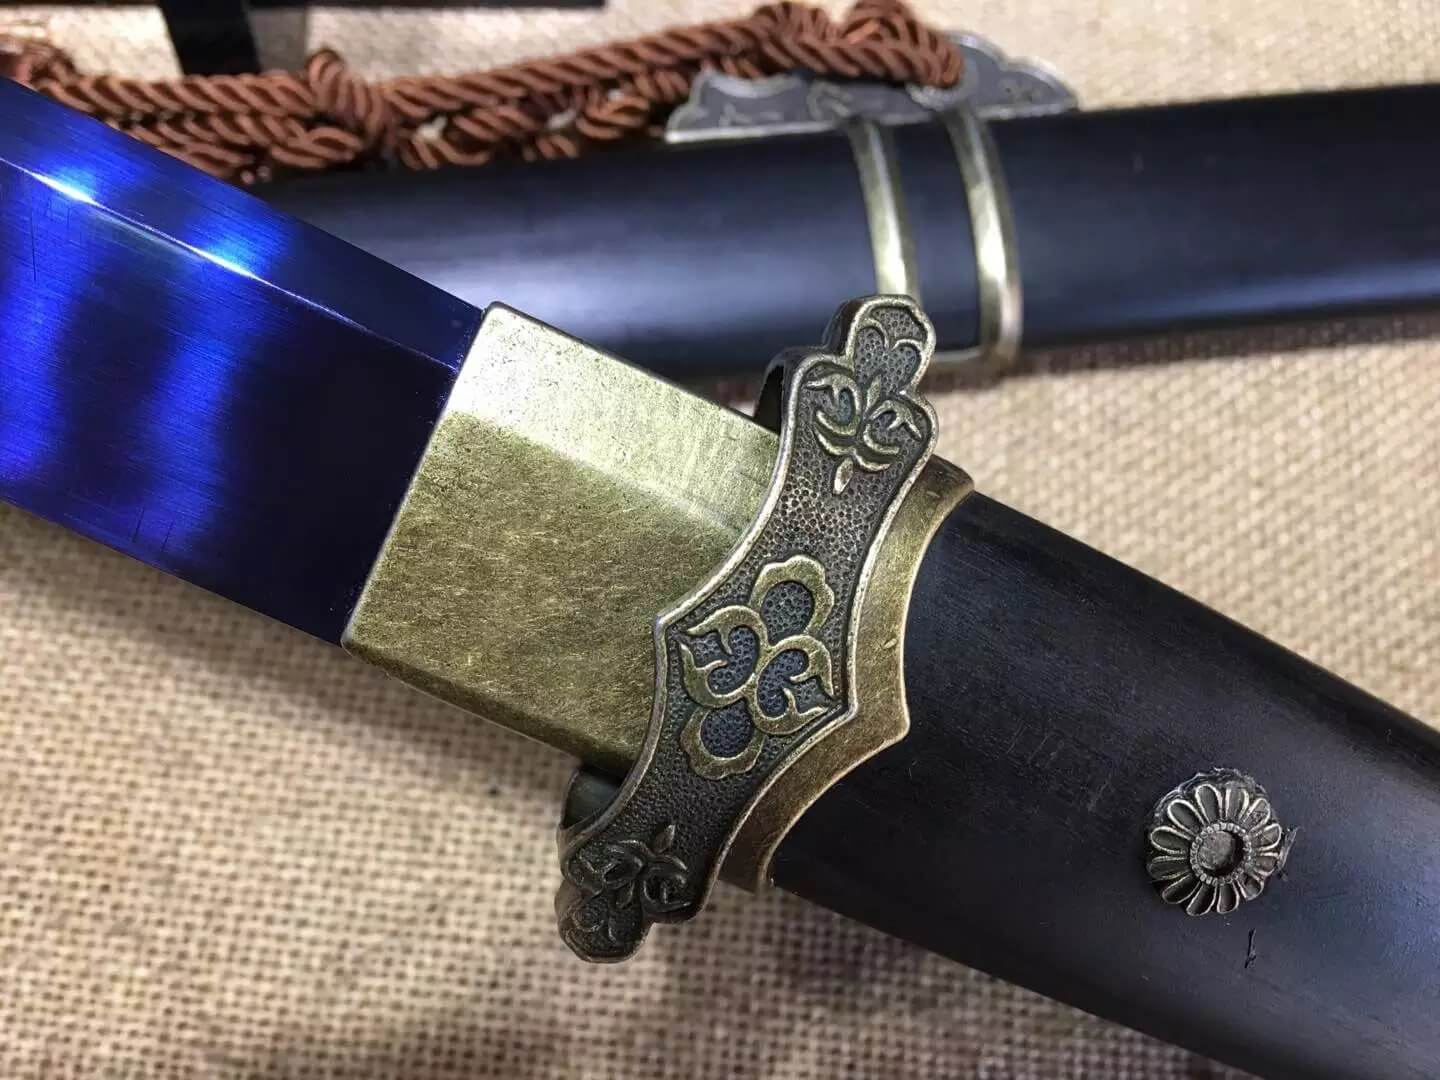 Tang dao,High carbon steel blue blade,Black wood,Alloy,Full tang - Chinese sword shop